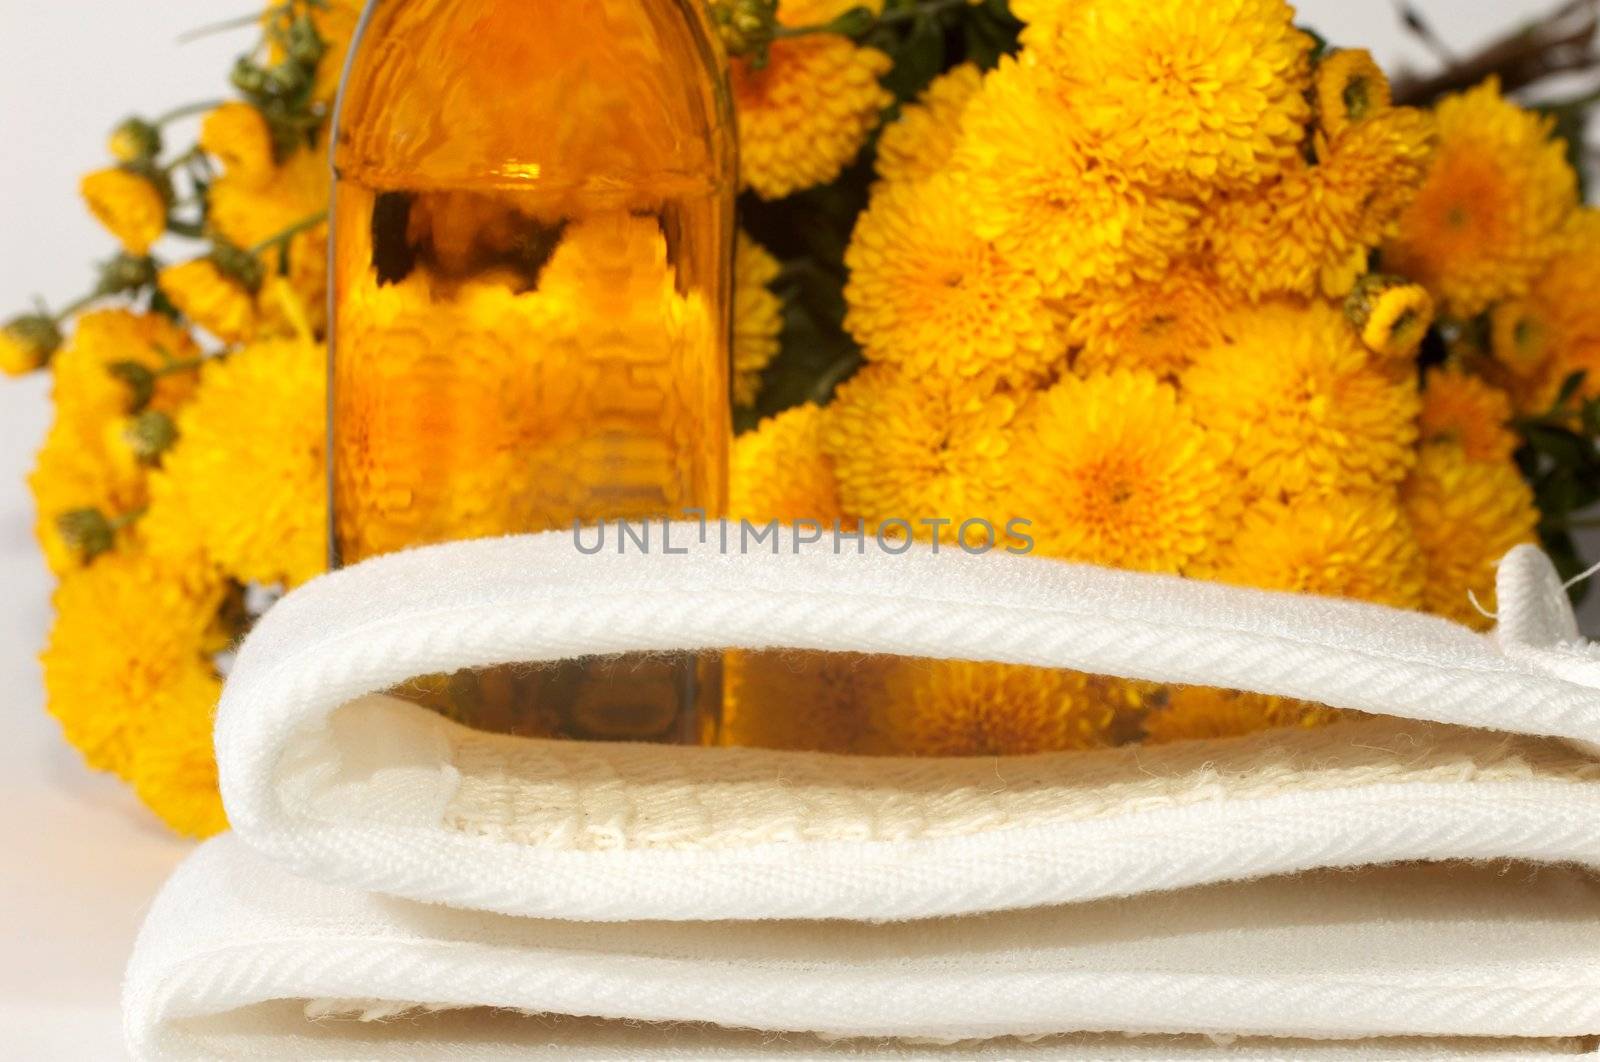 An image of oil and yellow flowers